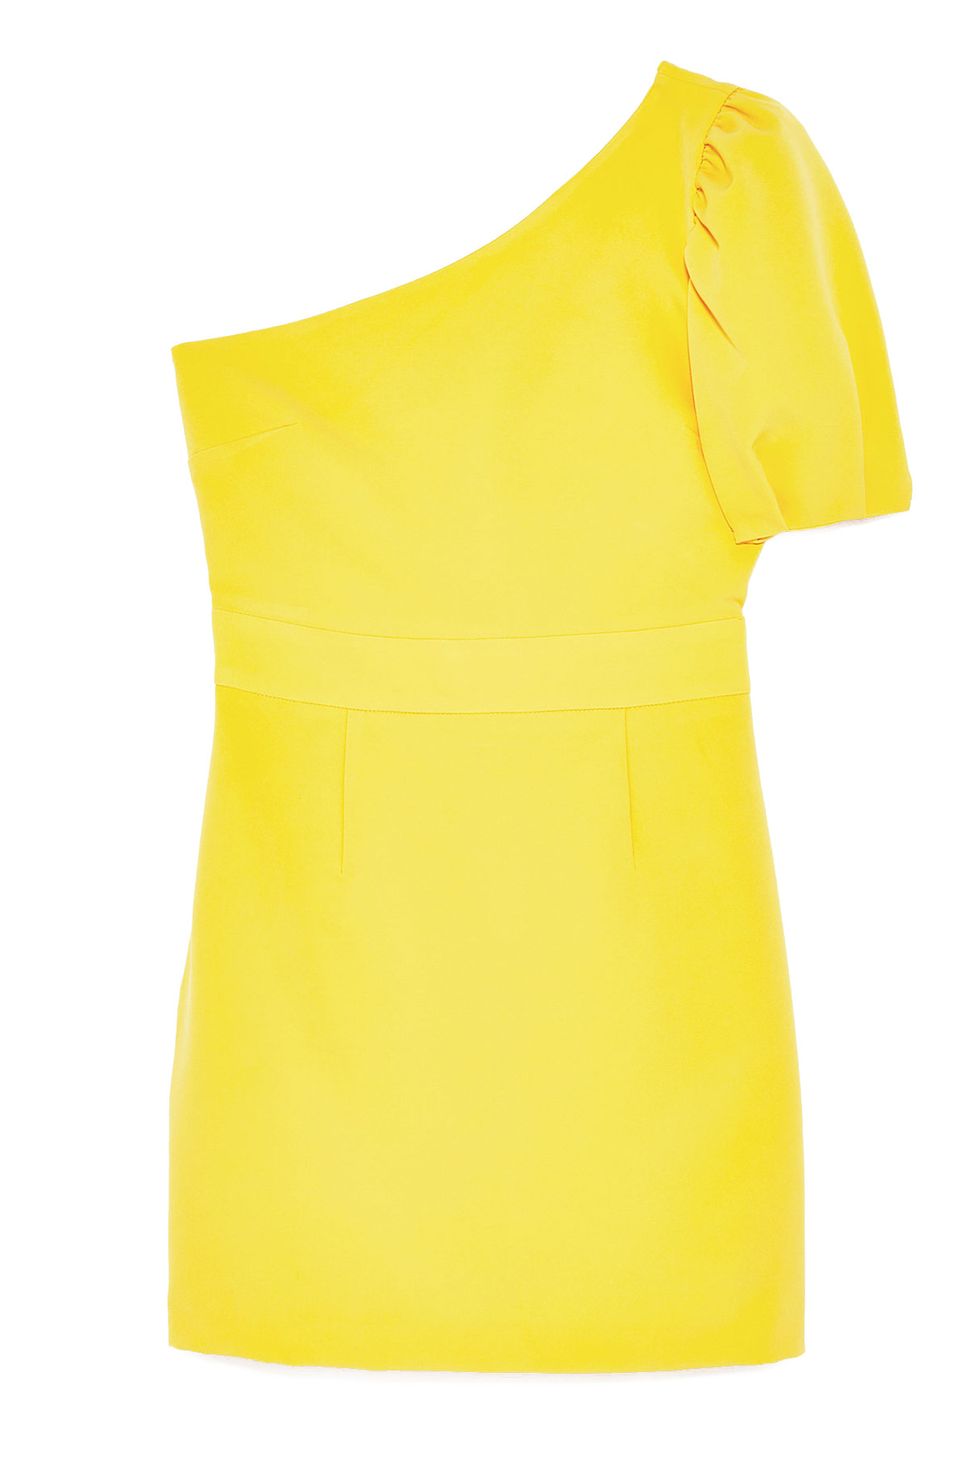 Clothing, Yellow, Shoulder, Dress, Neck, Day dress, Sleeve, Joint, T-shirt, Cocktail dress, 